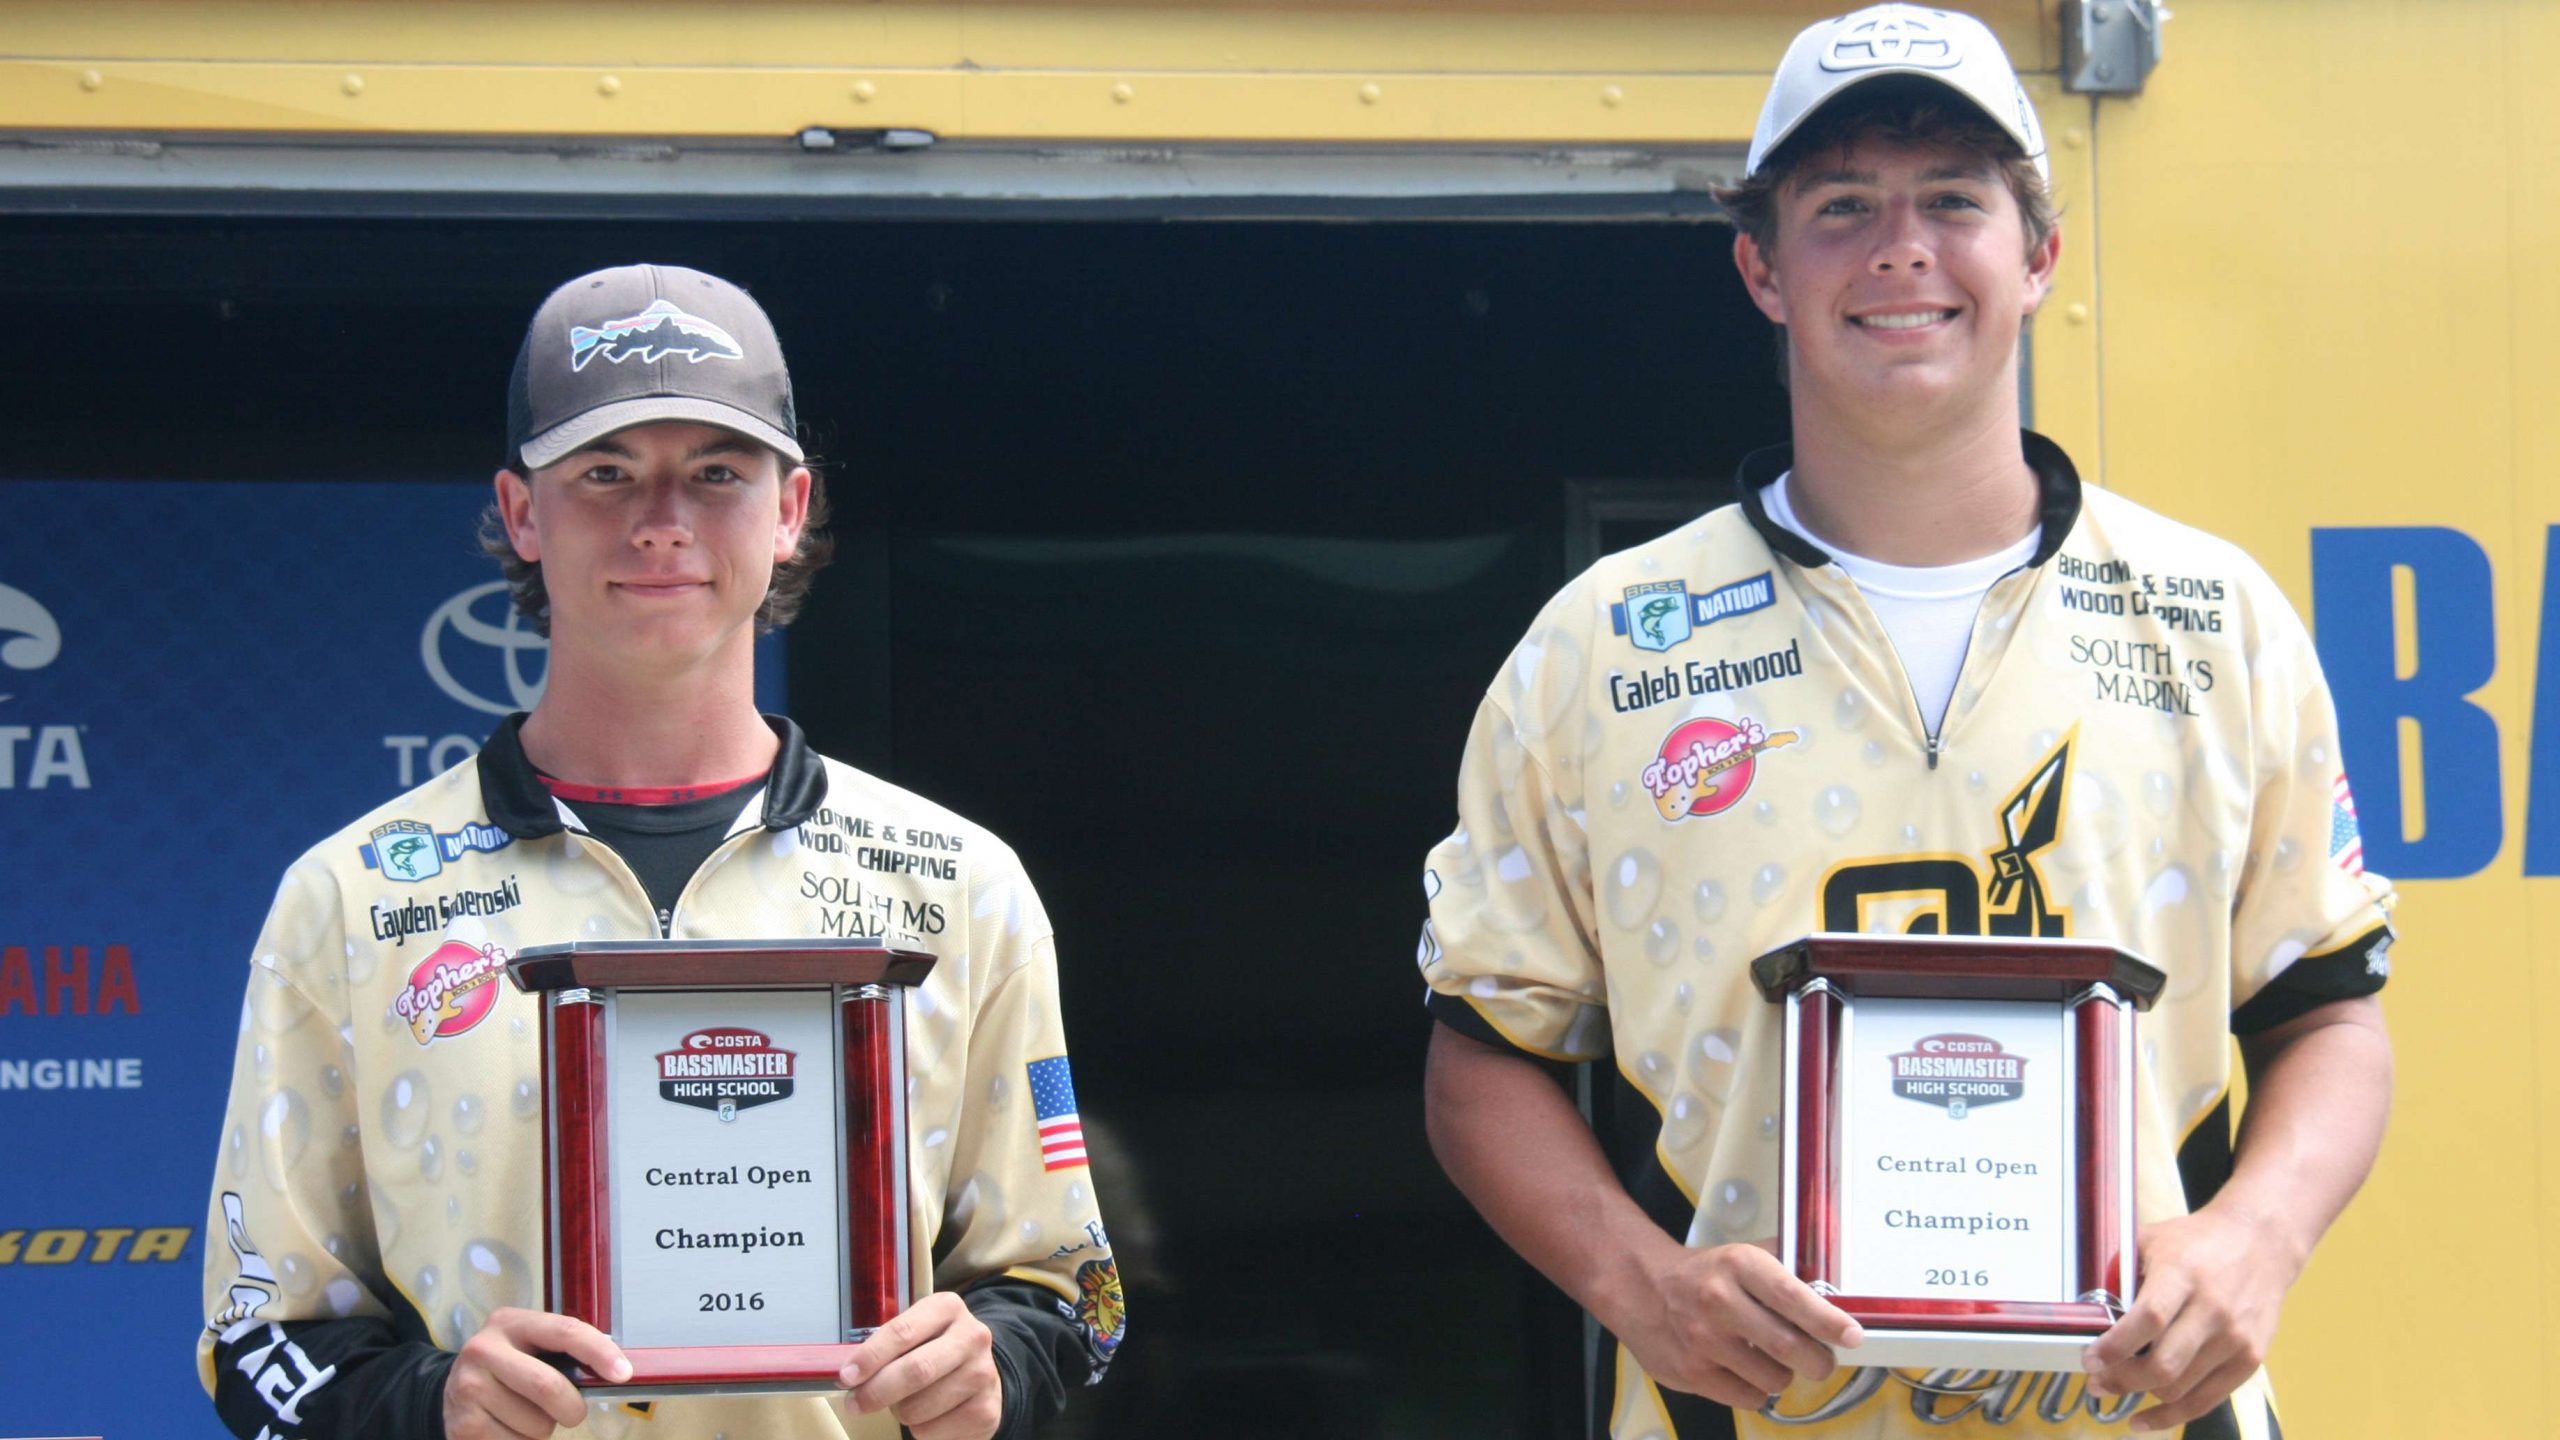 Indeed, they do. Cayden Soberoski, left, and Caleb Gatwood won the Costa Bassmaster High School Central Open on Toledo Bend. Their 14-4 total on only three bass, was not only unique, but it qualified them for the national championships on Kentucky Lake in August.